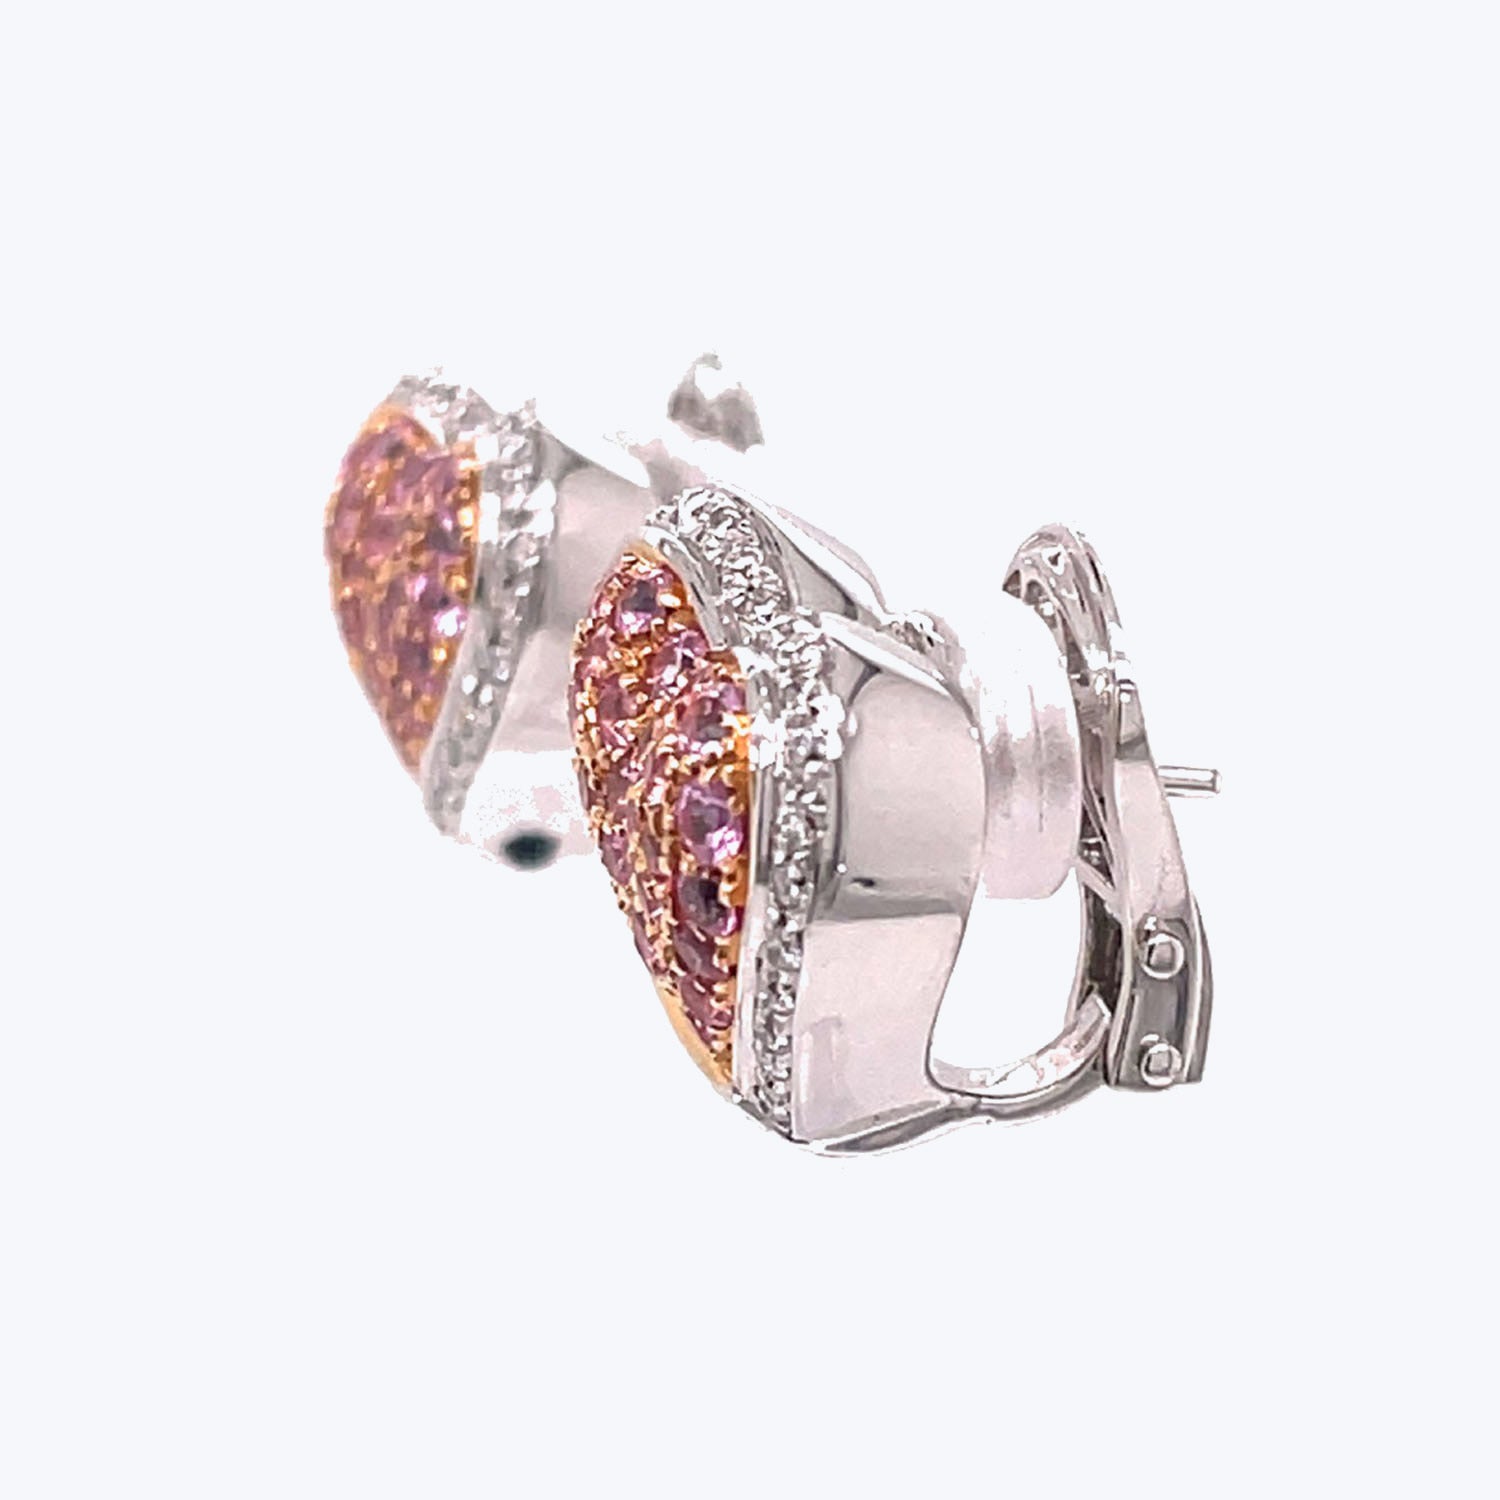 Elegant heart-shaped stud earrings with pinkish-orange crystals and halo